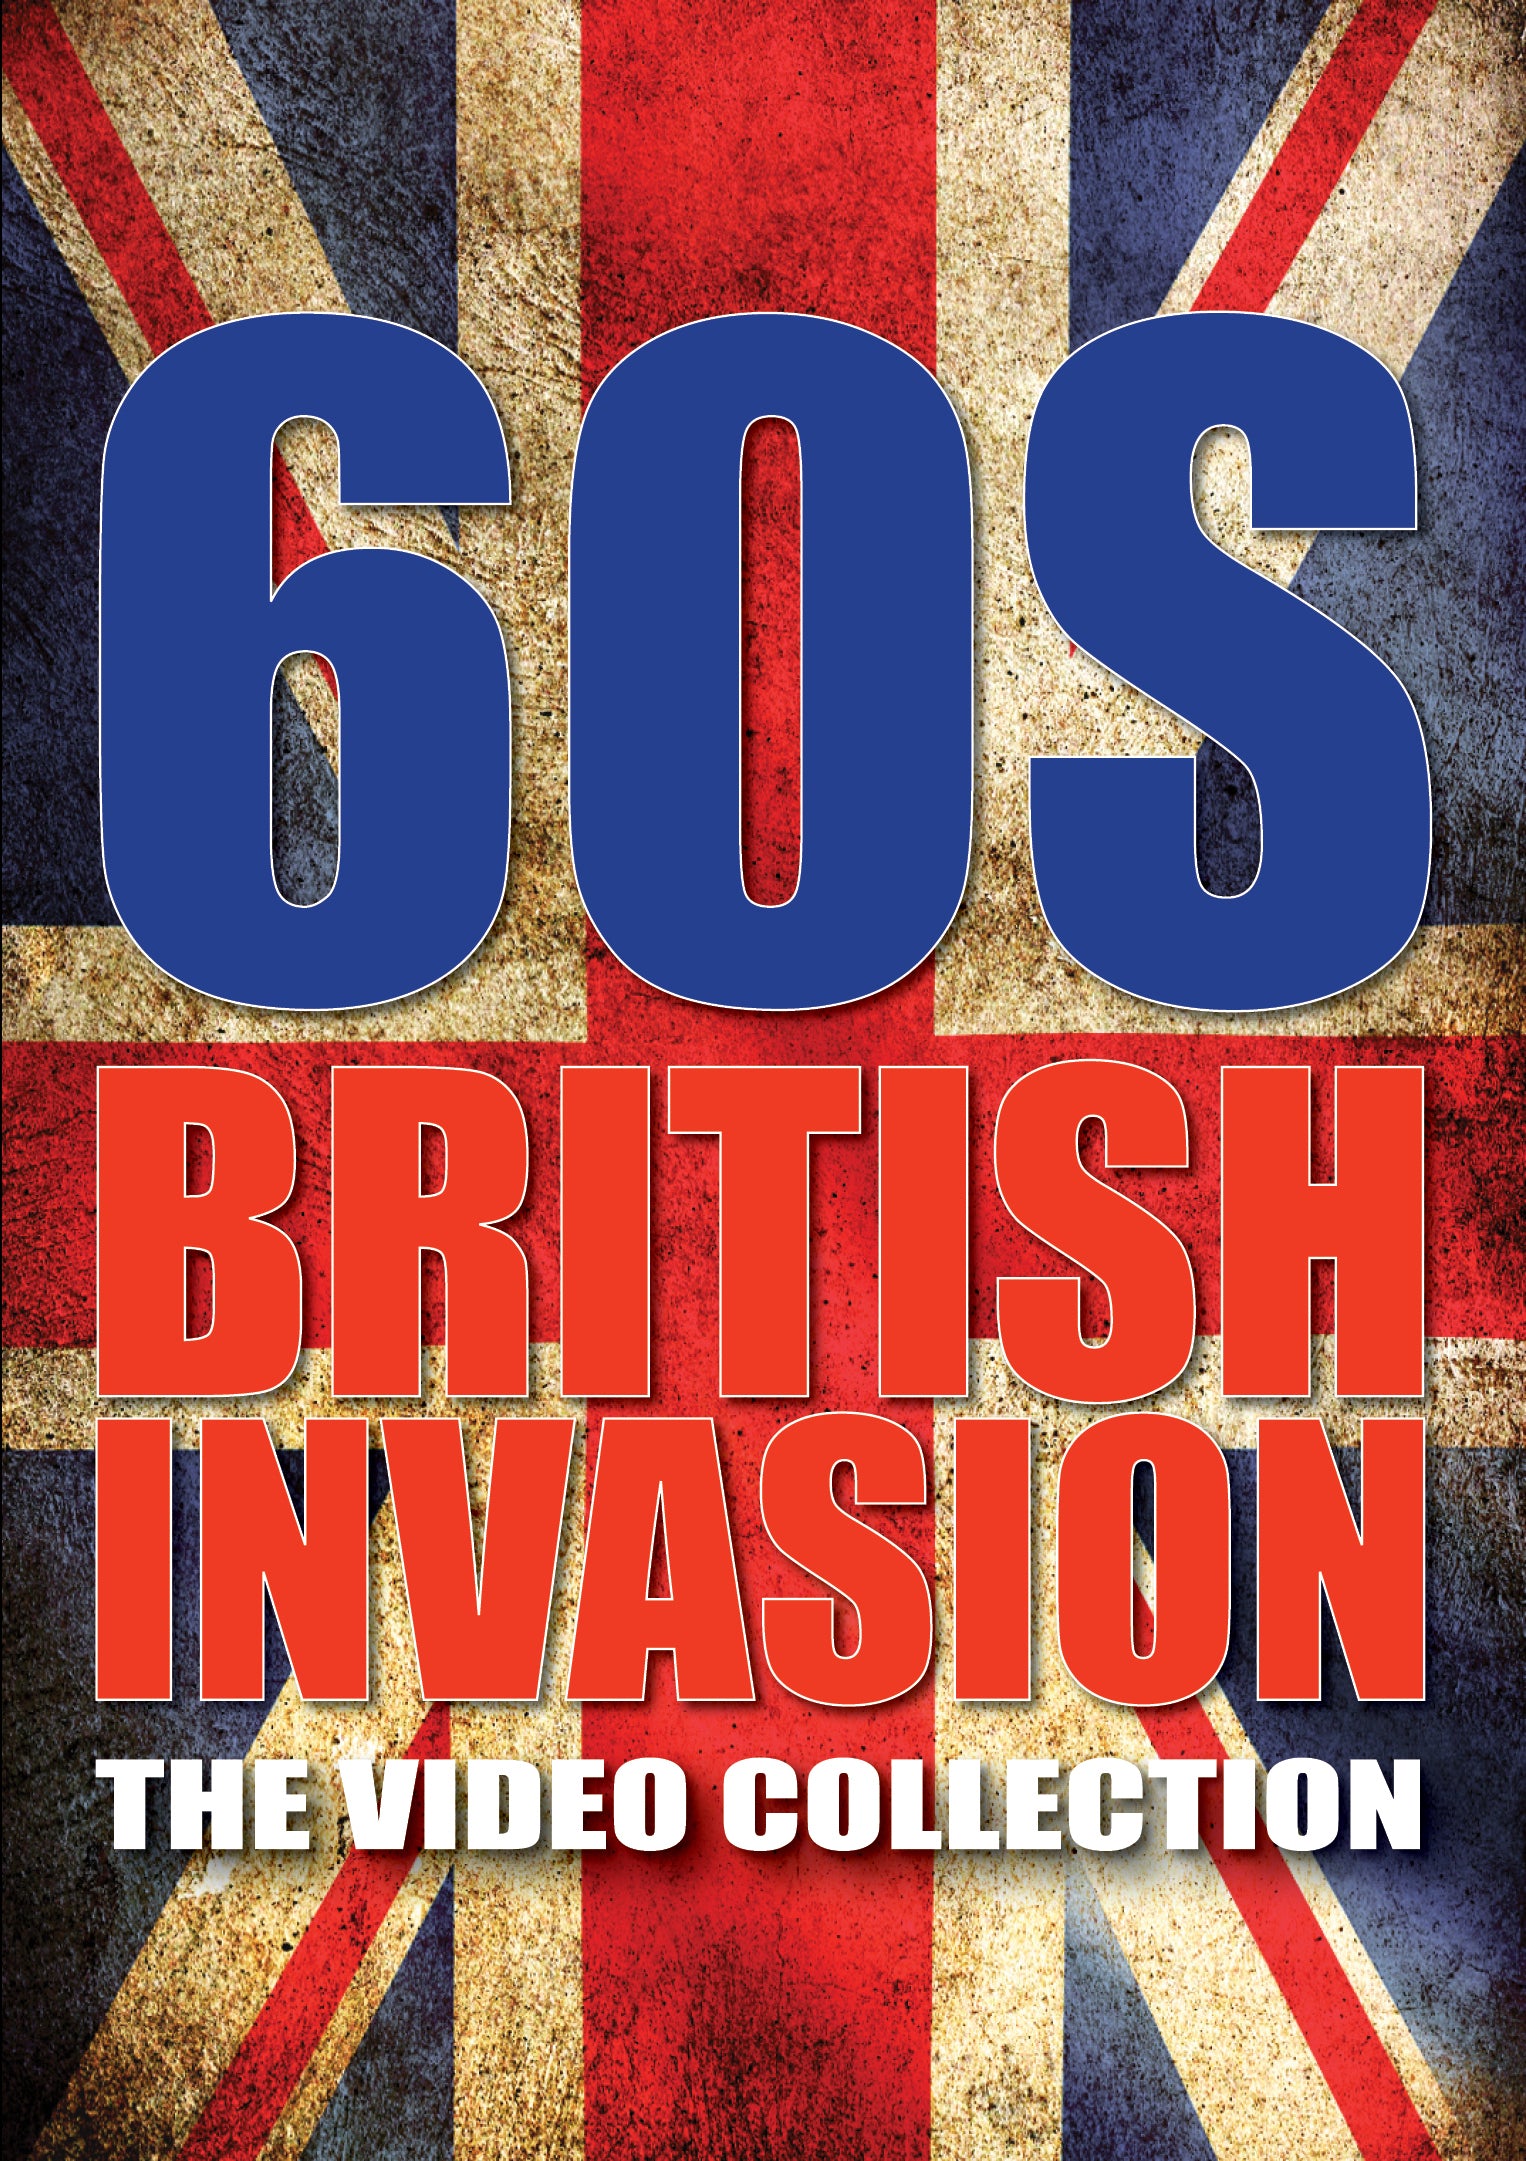 VARIOUS ARTISTS - 60S BRITISH INVASION: THE VIDEO COLLECTION